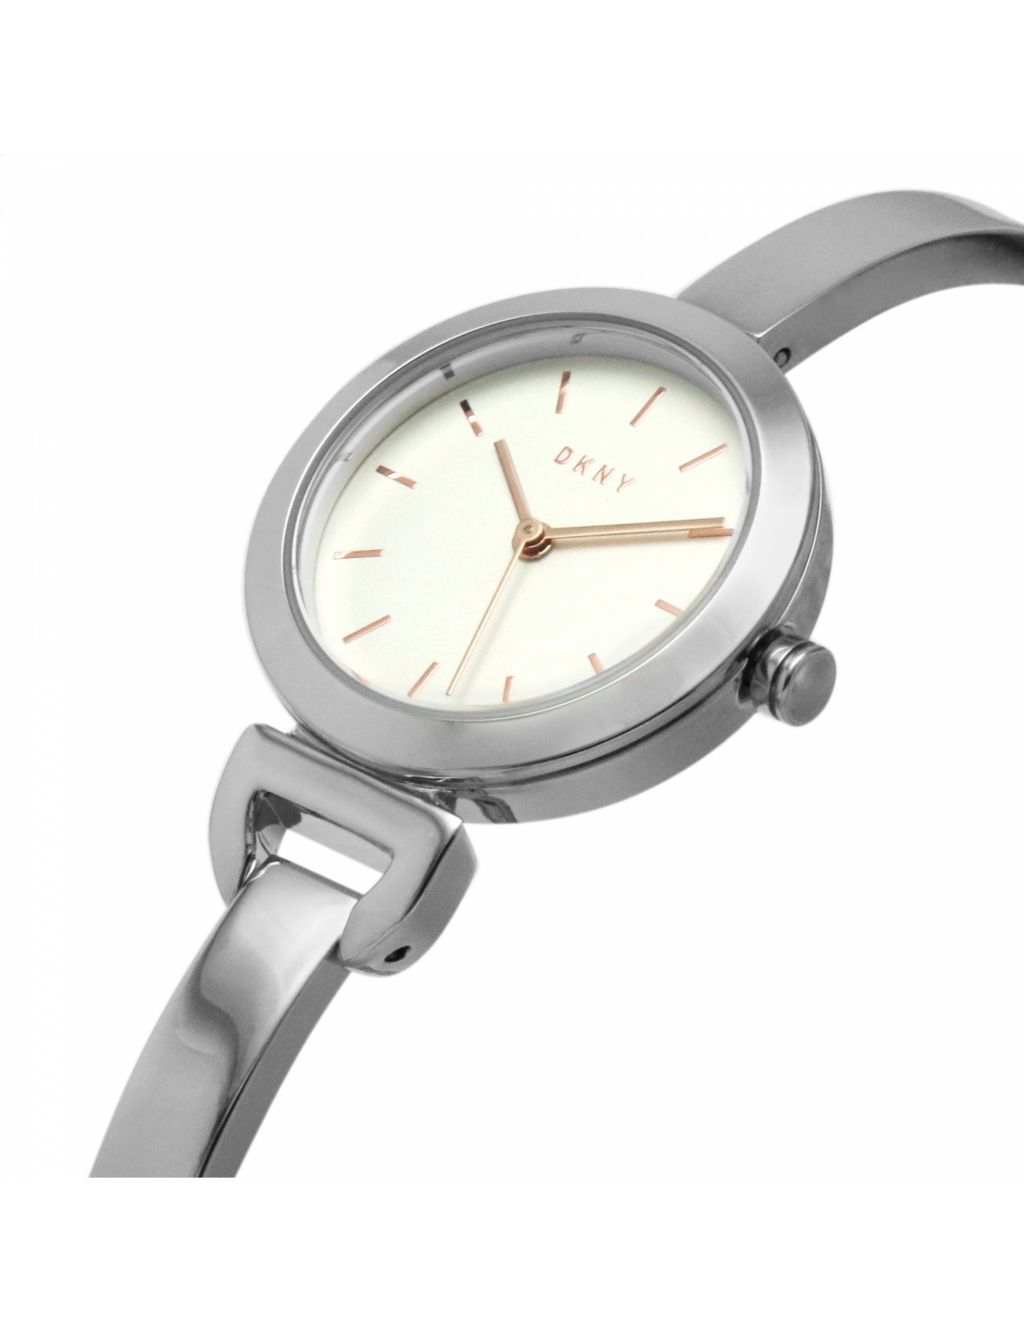 DKNY Uptown Stainless Steel Watch image 7